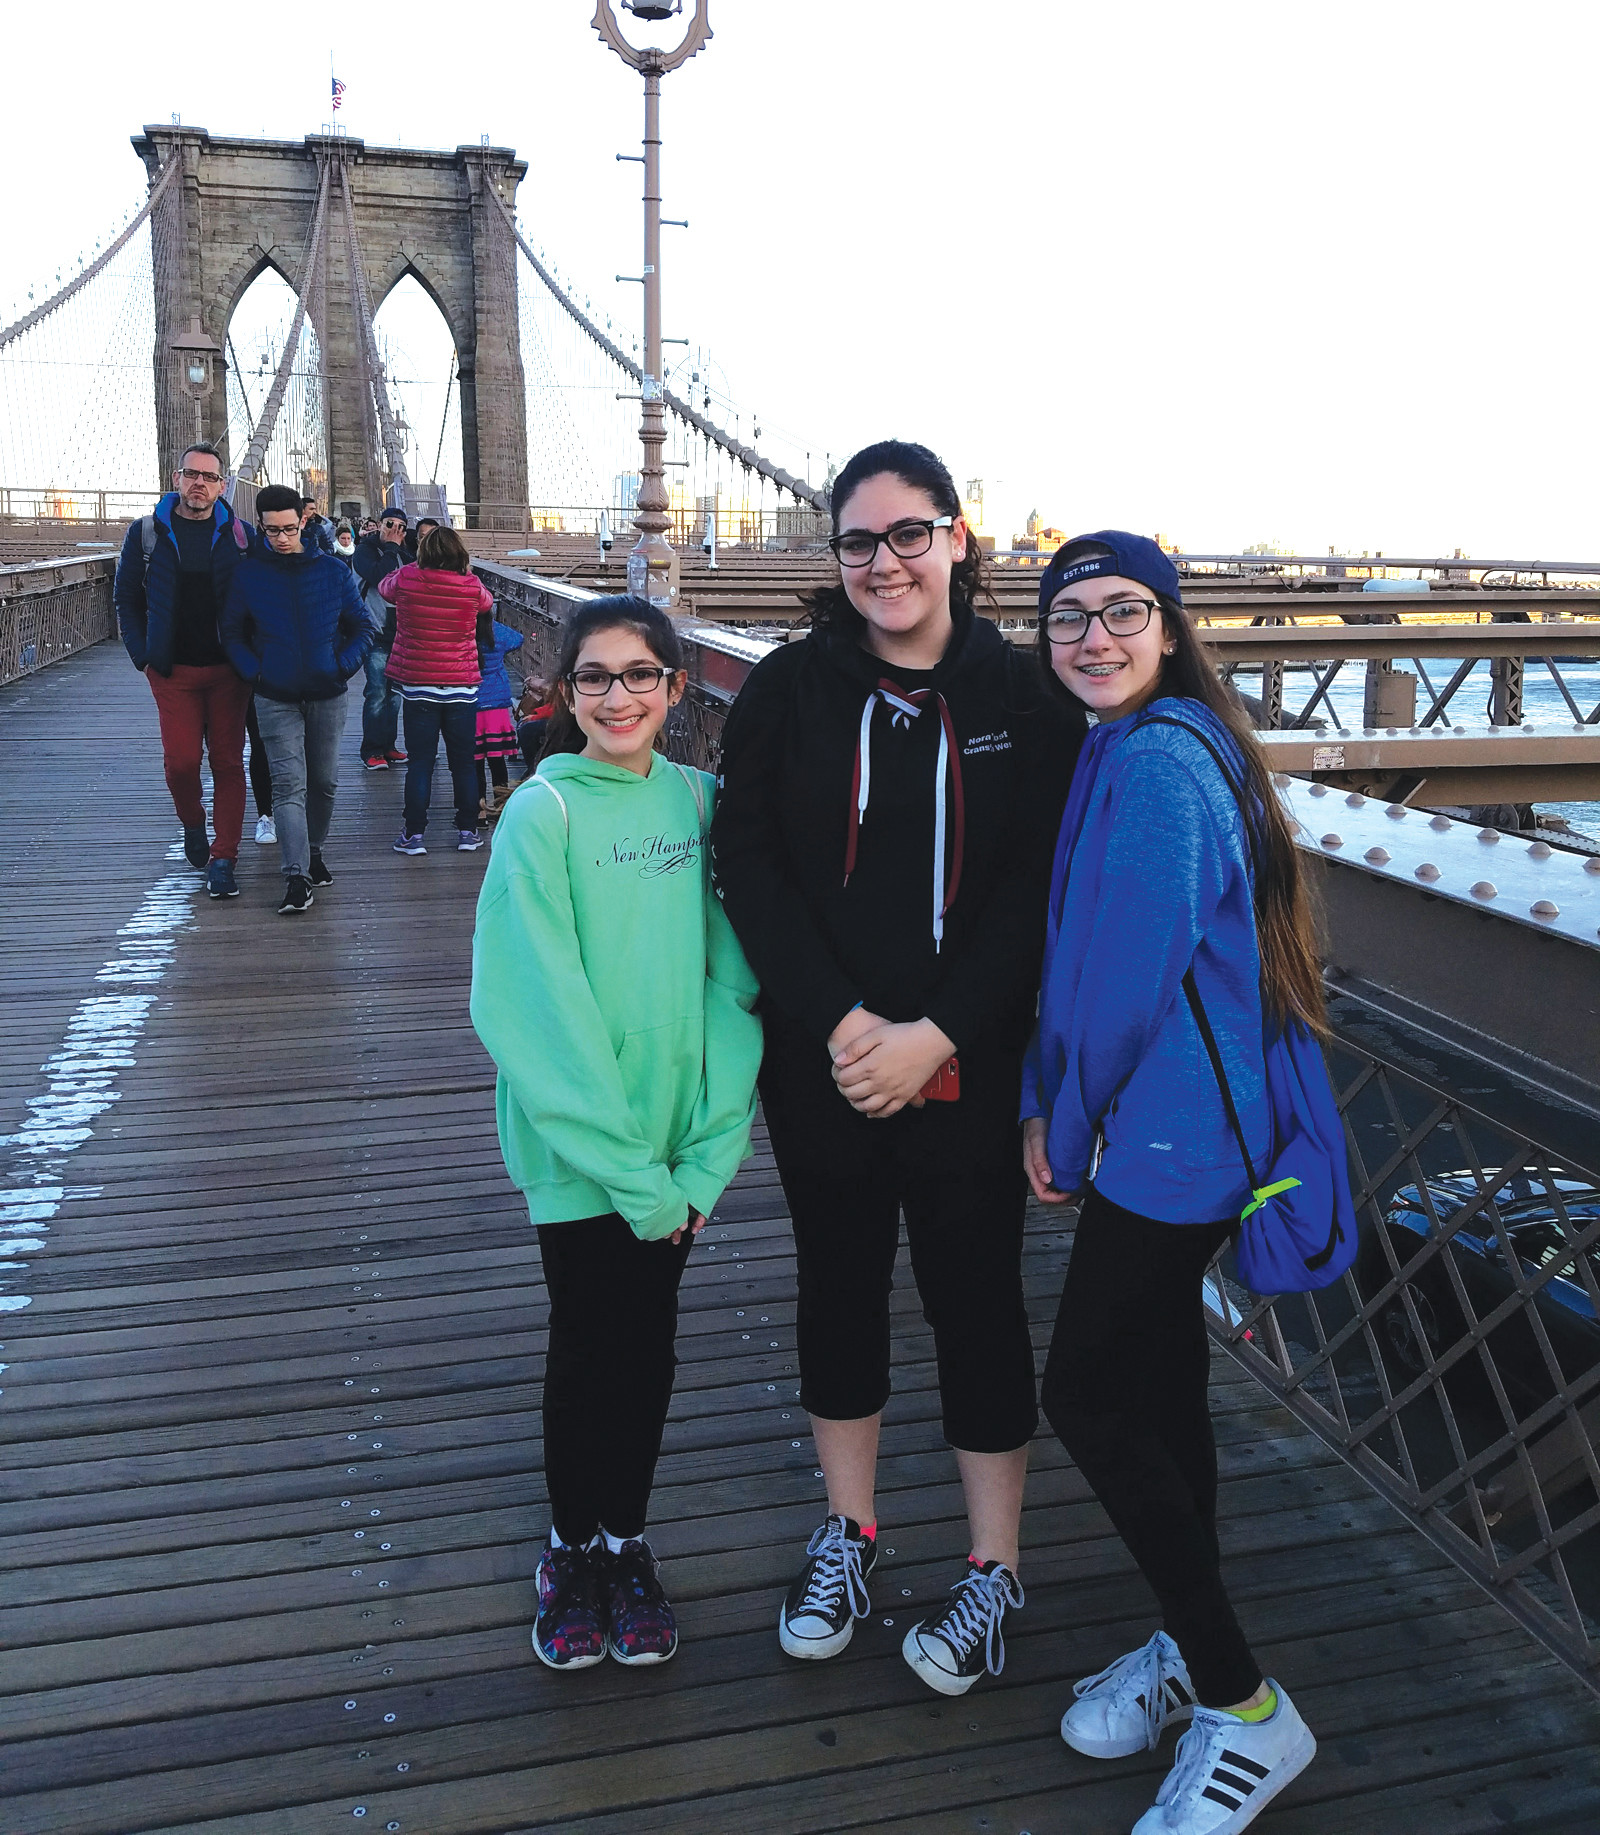 CHECKING IT OFF THE BUCKET LIST: Walking the Brooklyn Bridge at sunset was something we will always remember doing and was a highlight of the trip. It was one of the free things I had found when I researched free things to do in New York City.